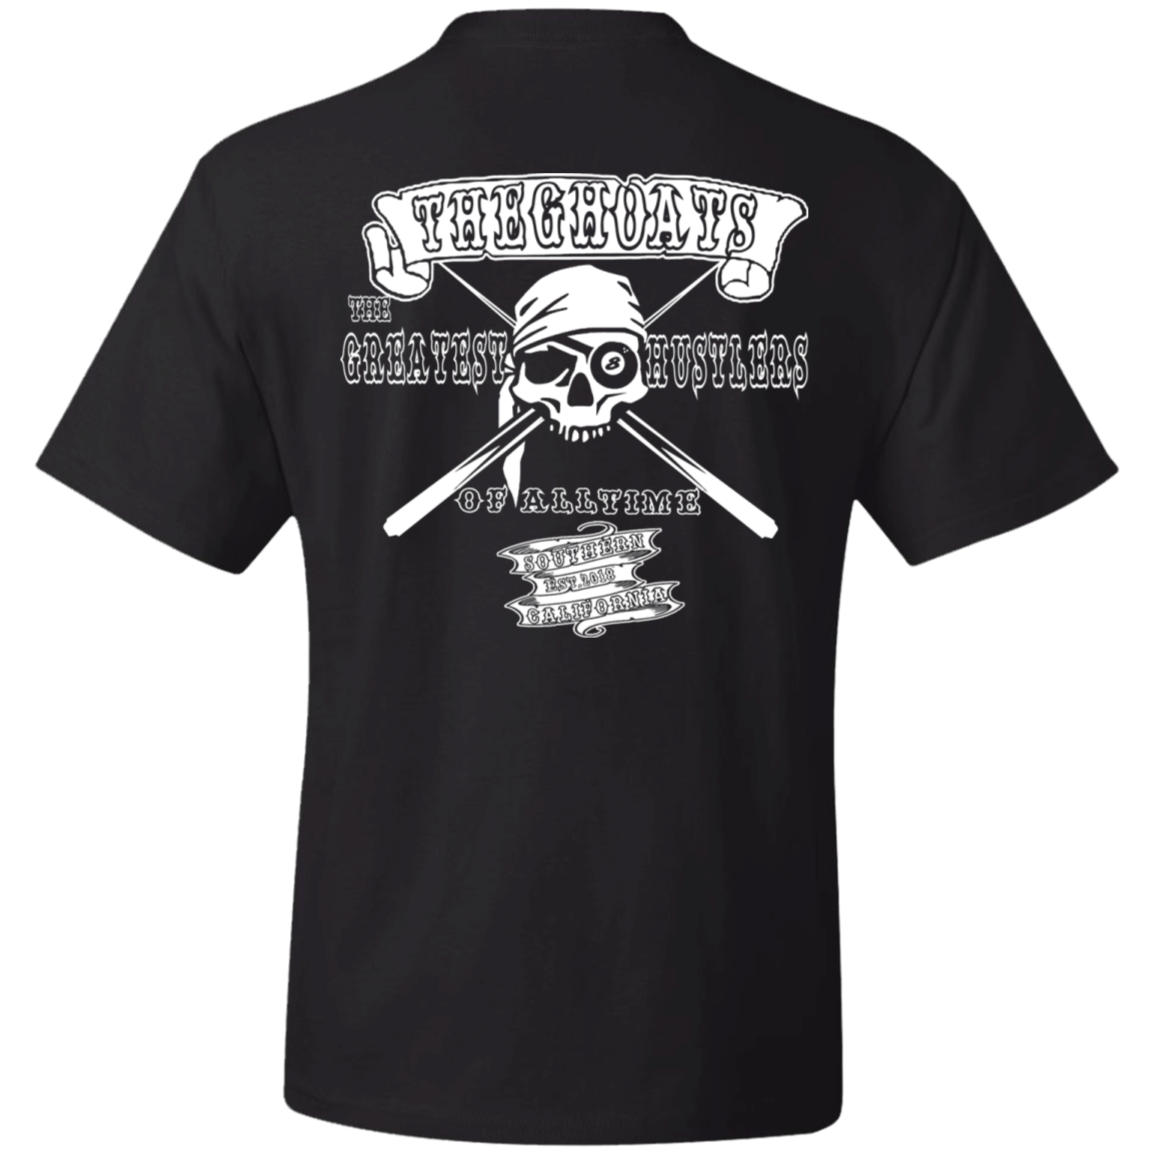 The GHOATS Custom Design. #4 Motorcycle Club Style. Ver 2/2. Heavy Cotton T-Shirt